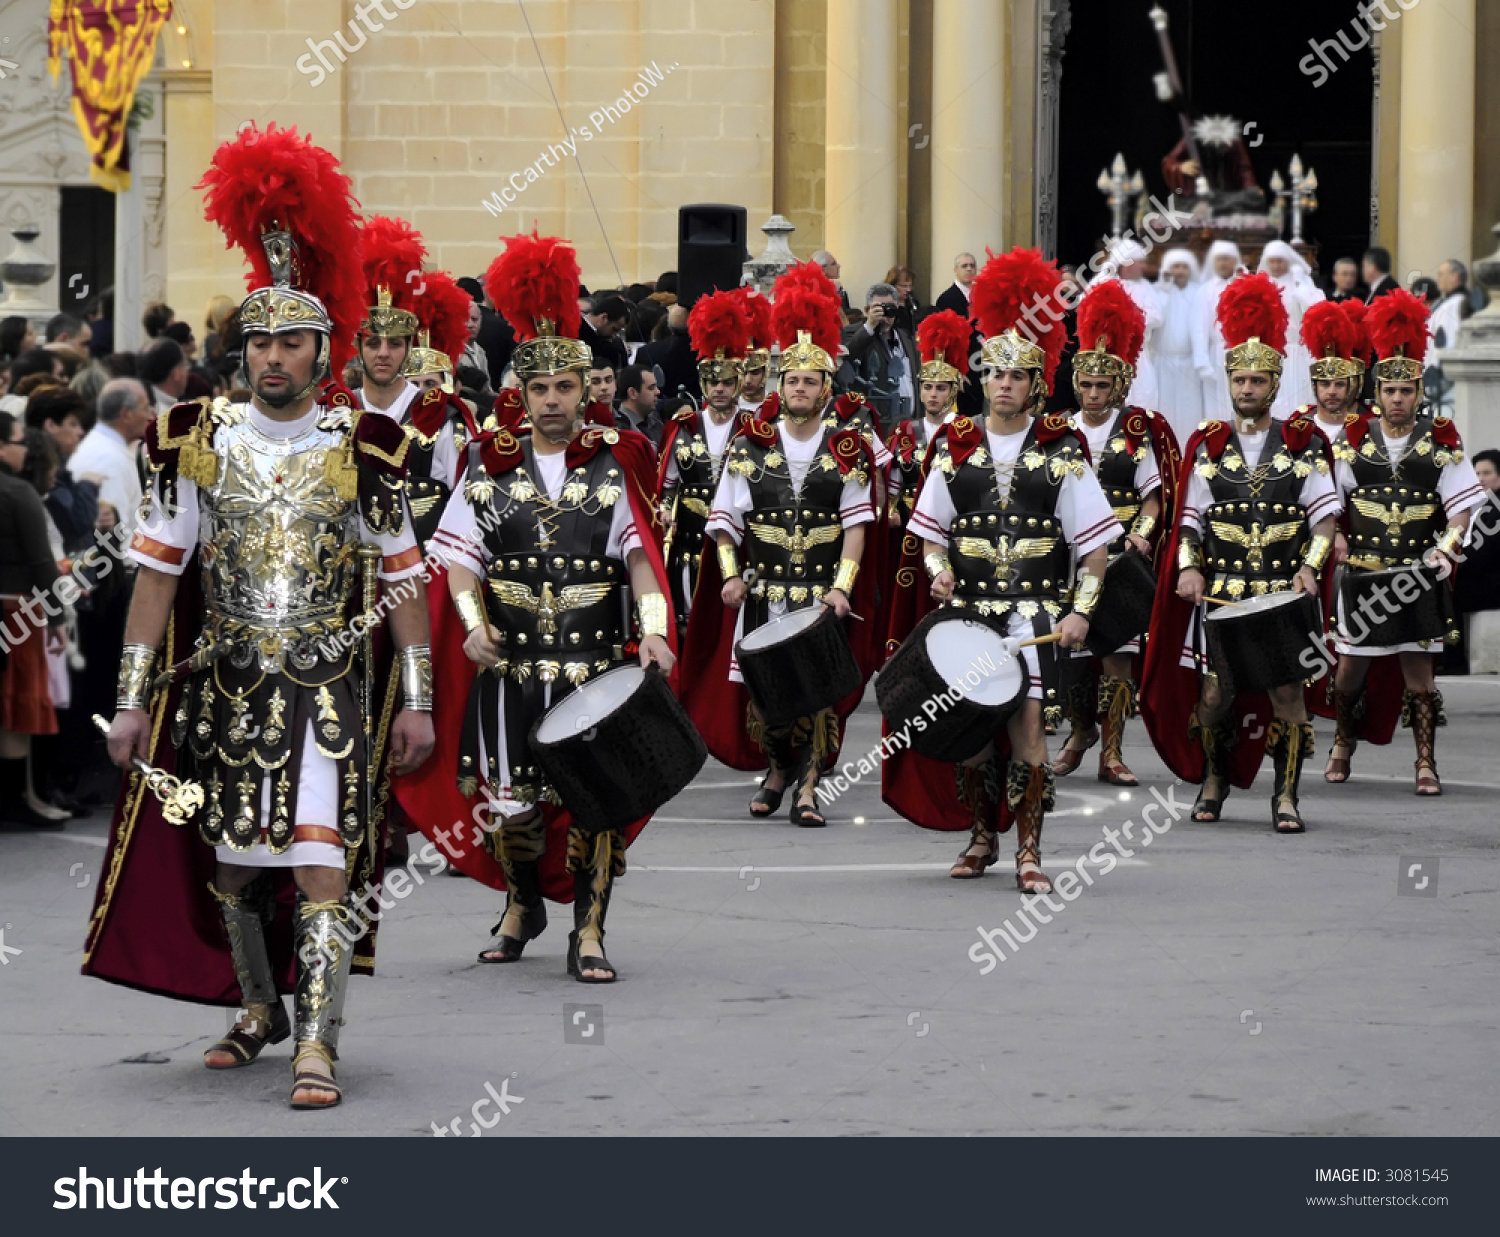 stock-photo-spqr-series-imagery-depicting-re-enactment-of-roman-empire-legion-march-during-good-friday-3081545.jpg